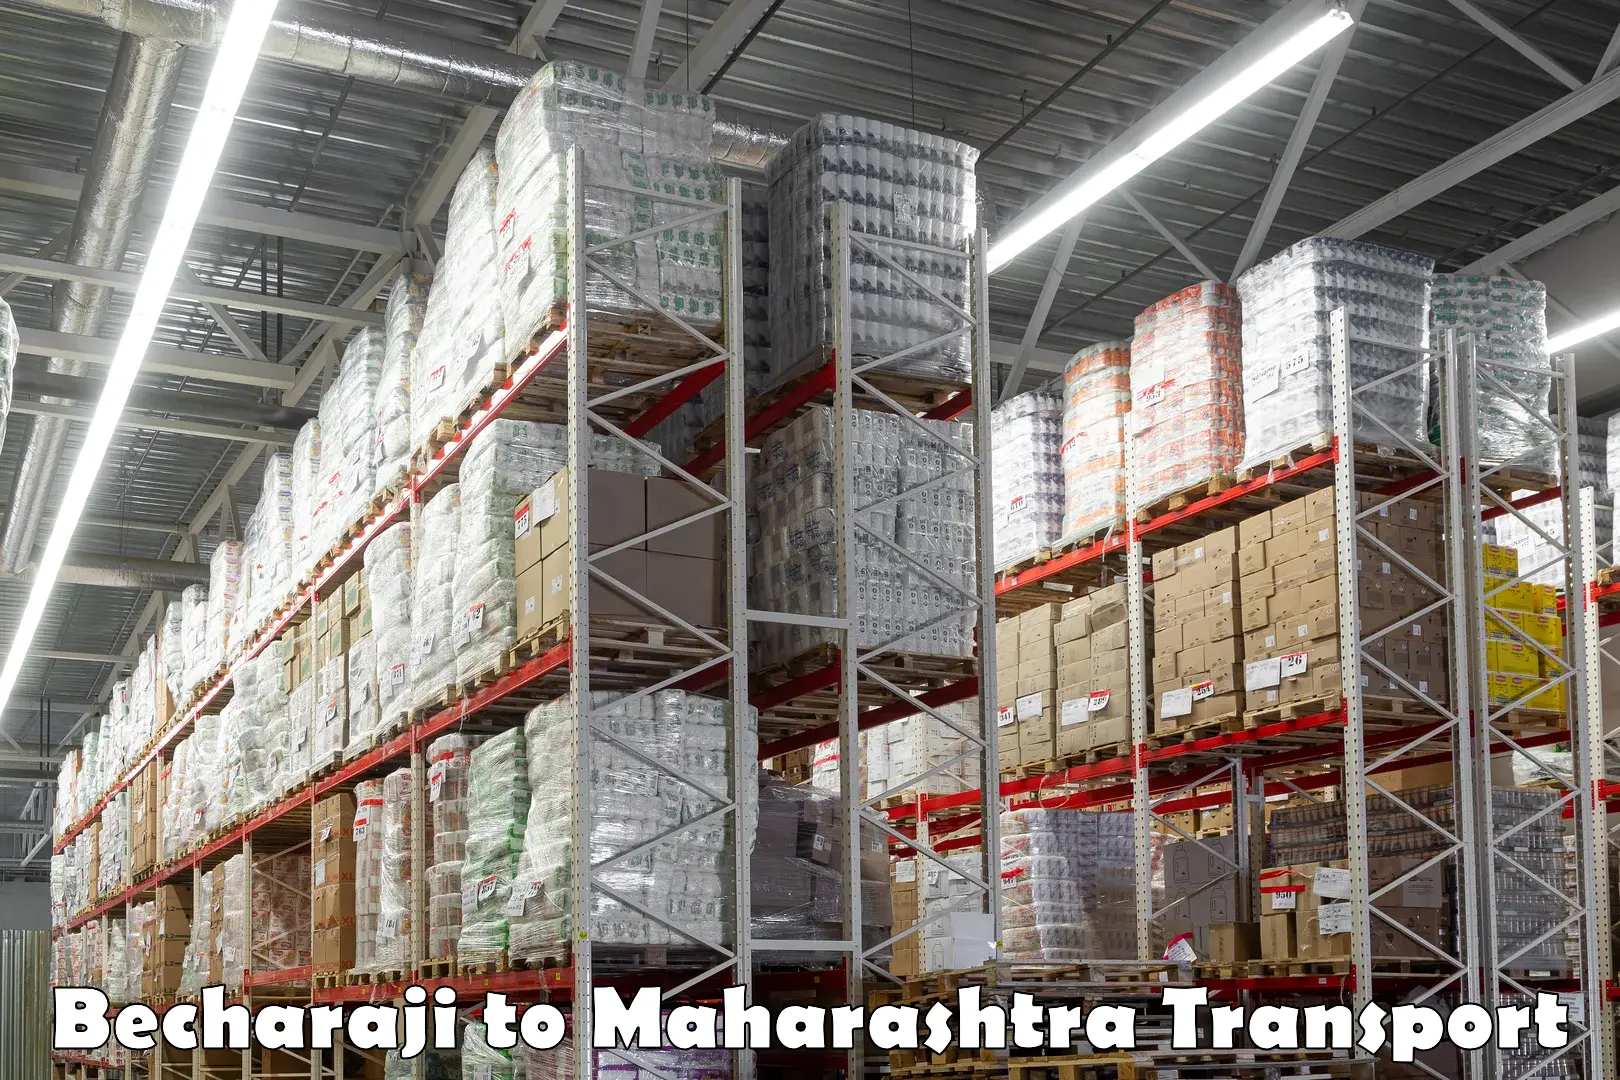 Part load transport service in India Becharaji to Chalisgaon